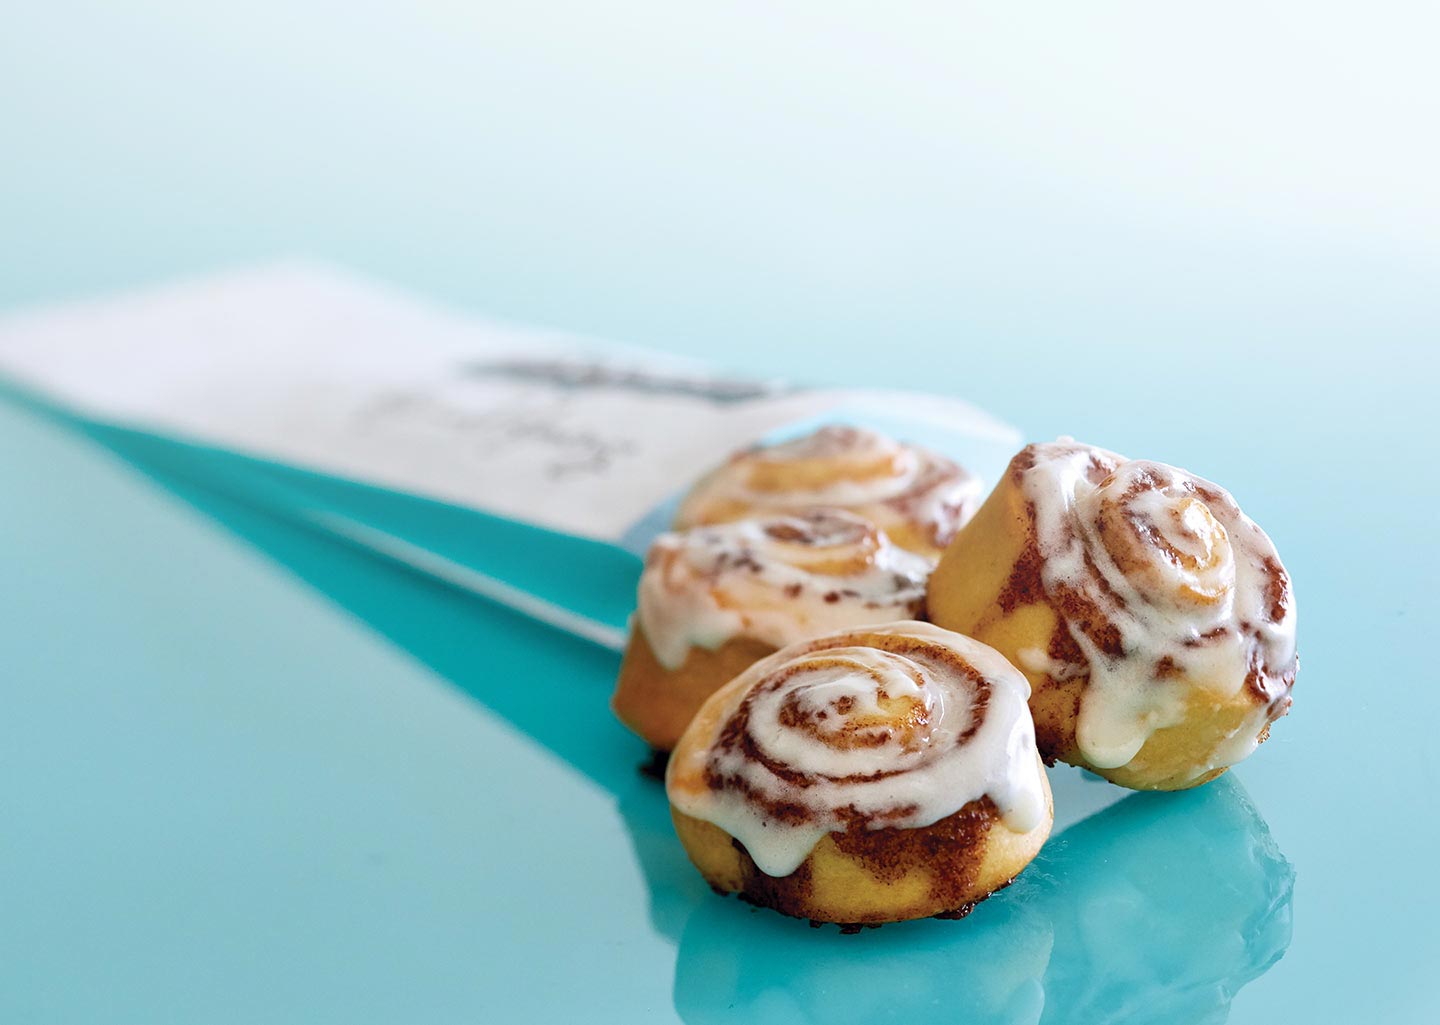 T-Mobile customers can get free Cinnabon and a T-Mo flashlight next Tuesday  - TmoNews